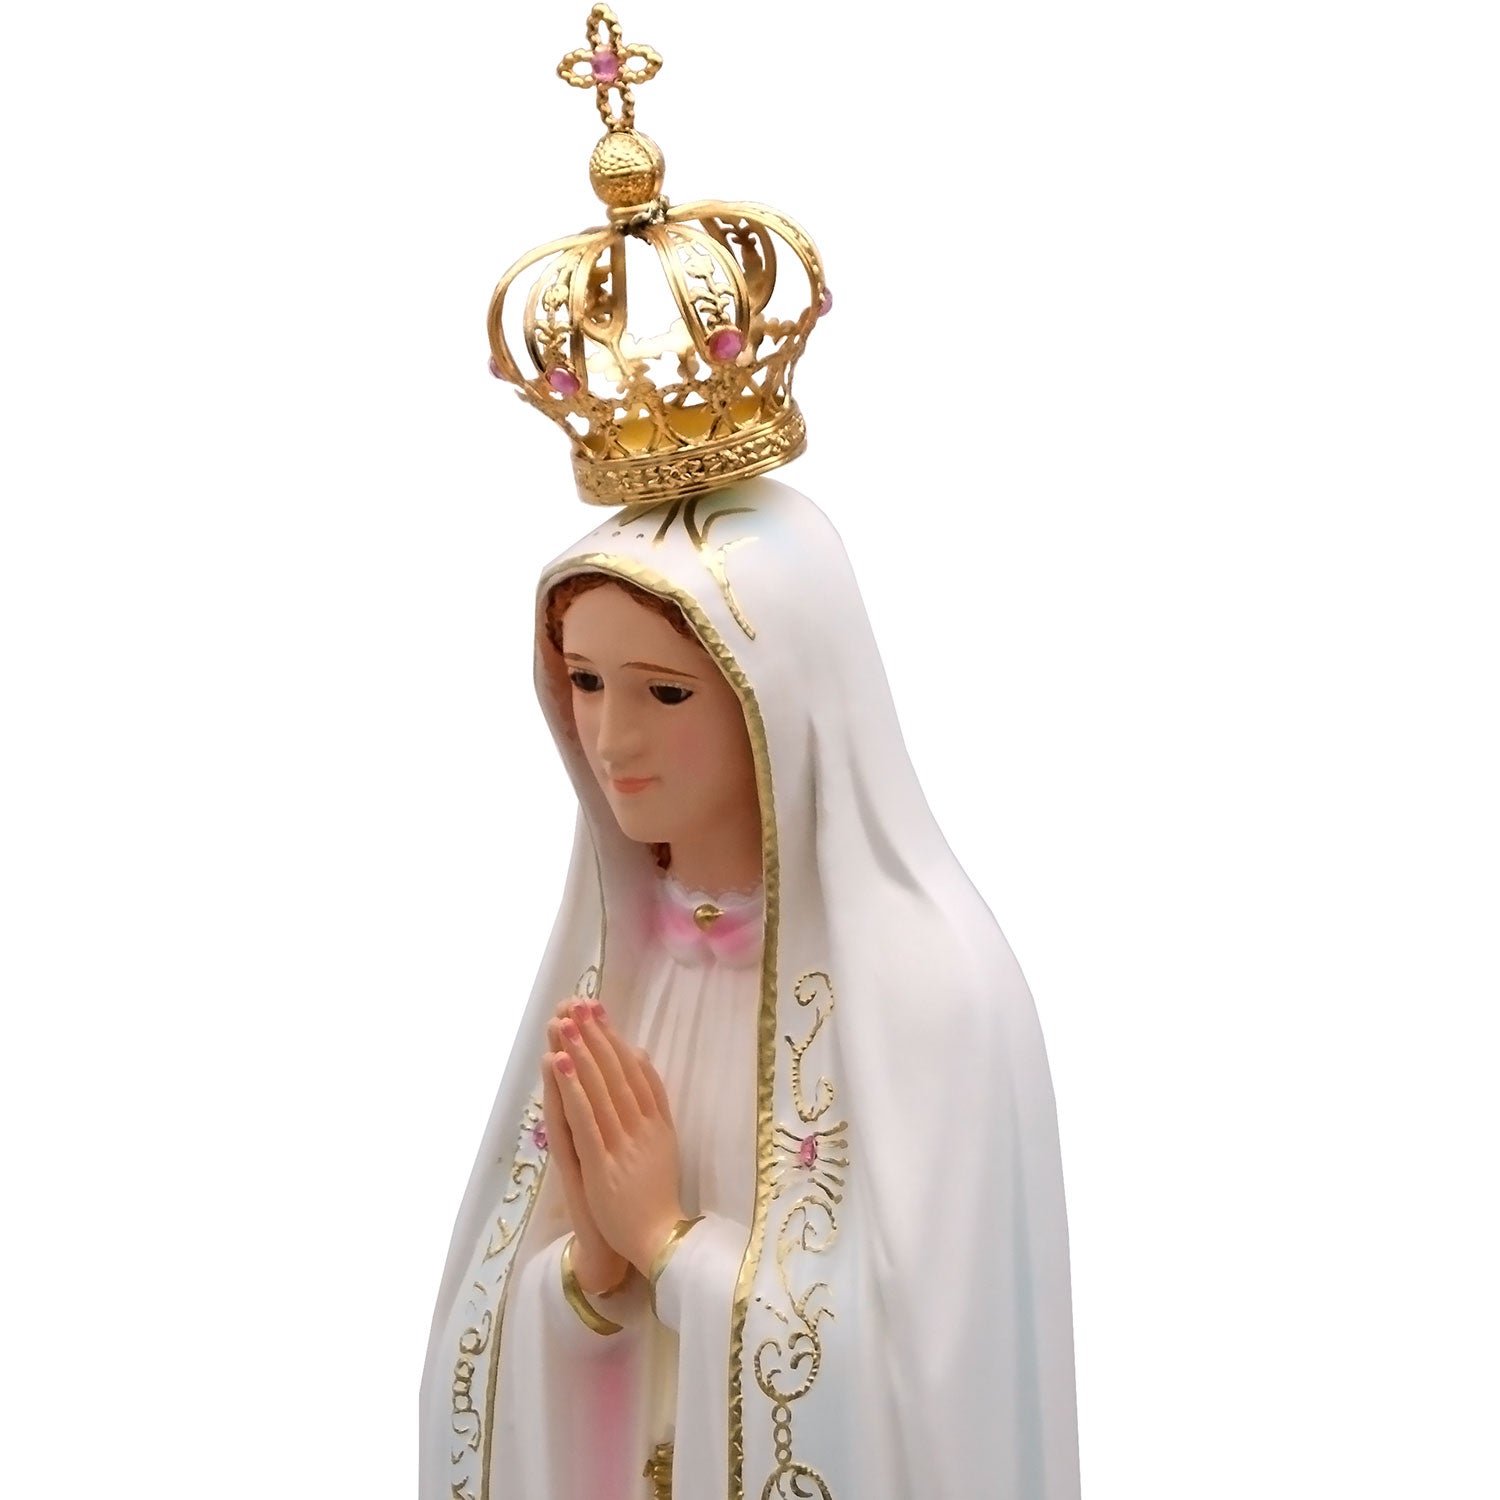 30 Inch Glass Eyes Our Lady of Fatima Statue Made in Portugal